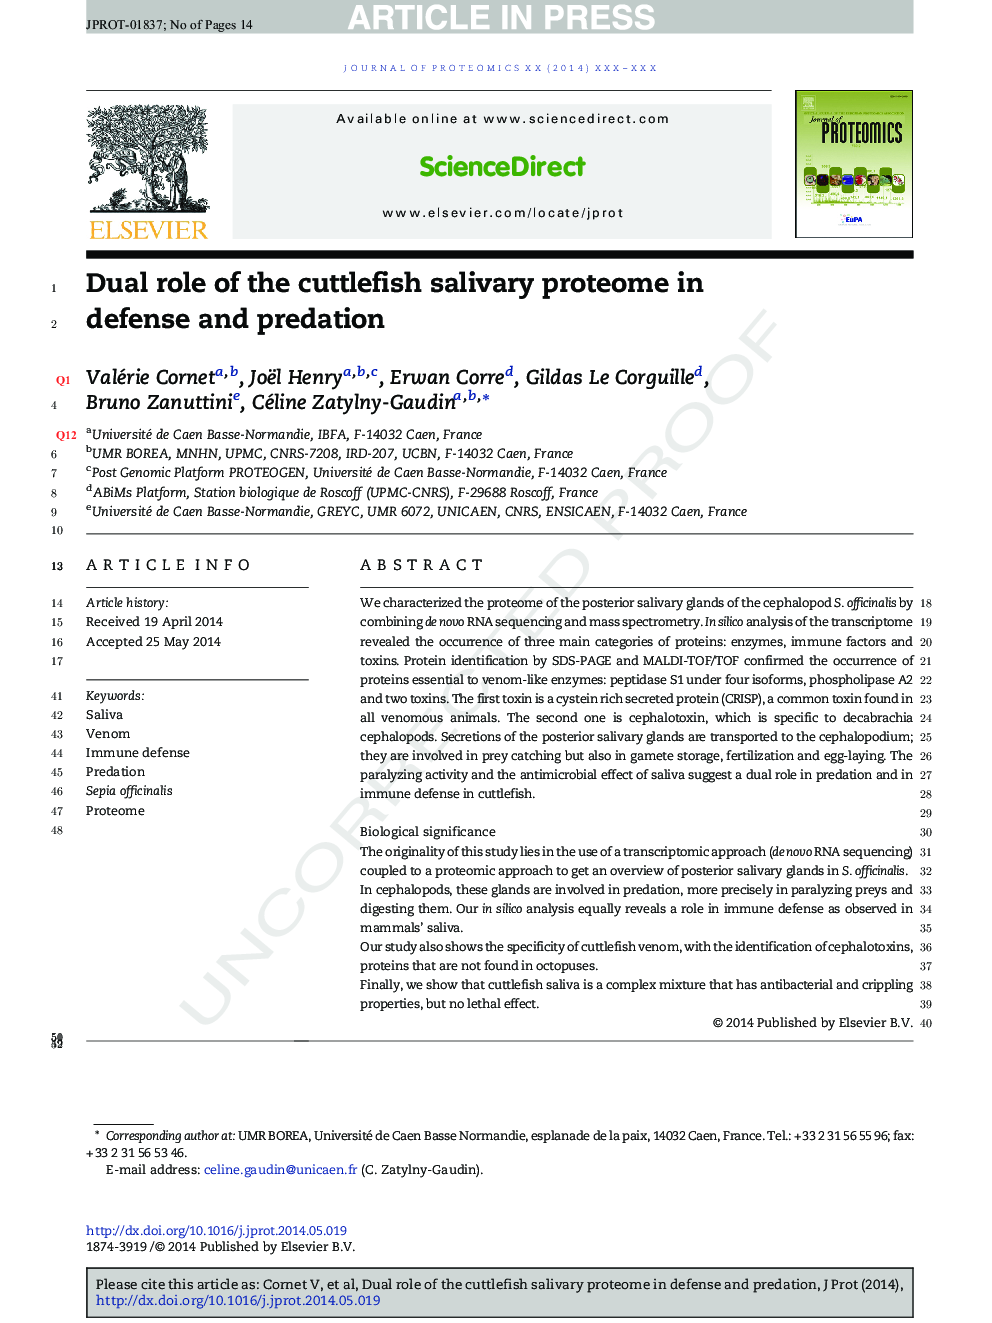 Dual role of the cuttlefish salivary proteome in defense and predation